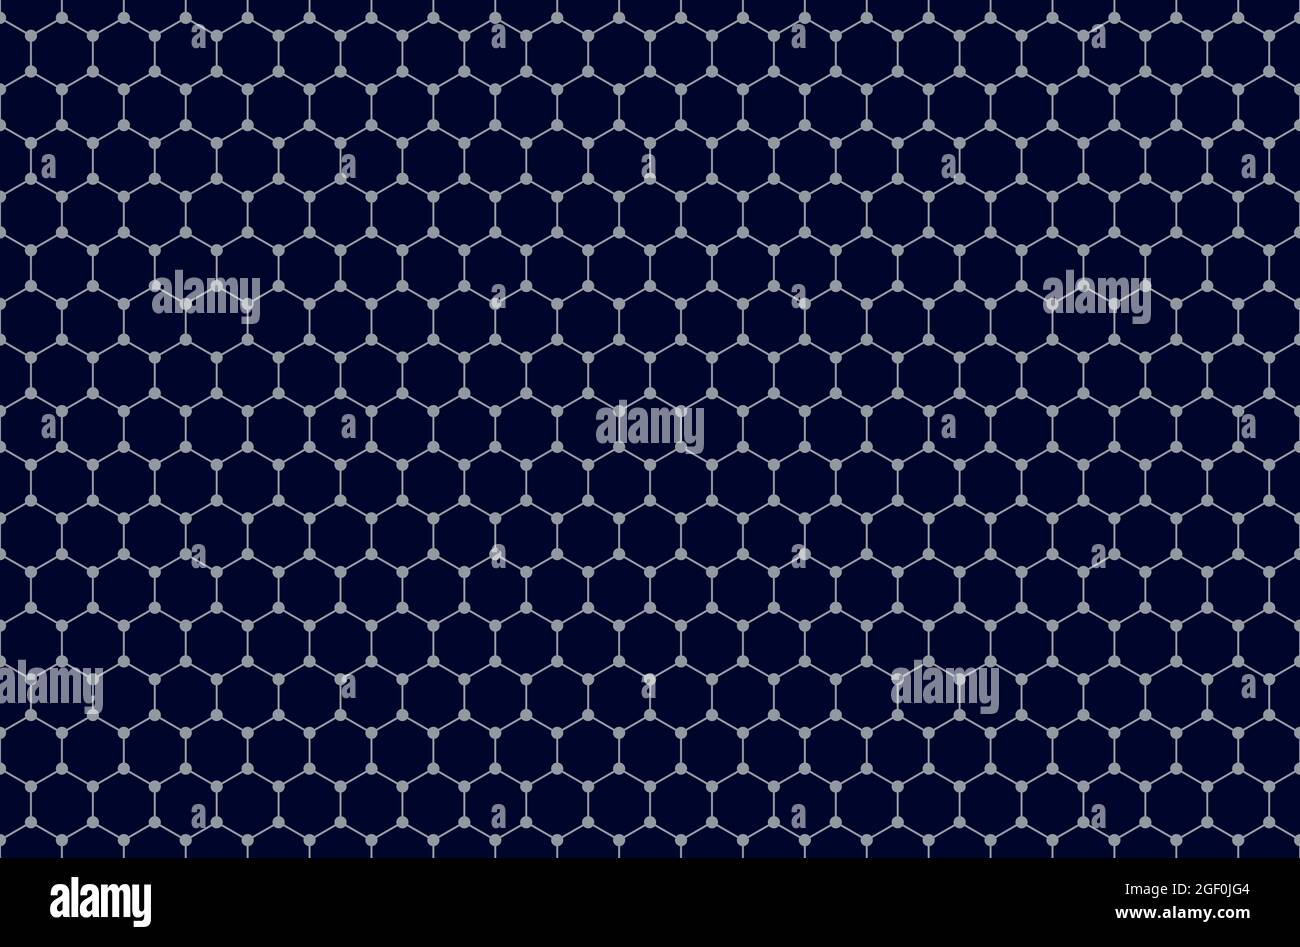 Graphene seamless pattern background. Tile of two-dimensional honeycomb lattice, schematic structure of a single layer of carbon atoms. Stock Photo